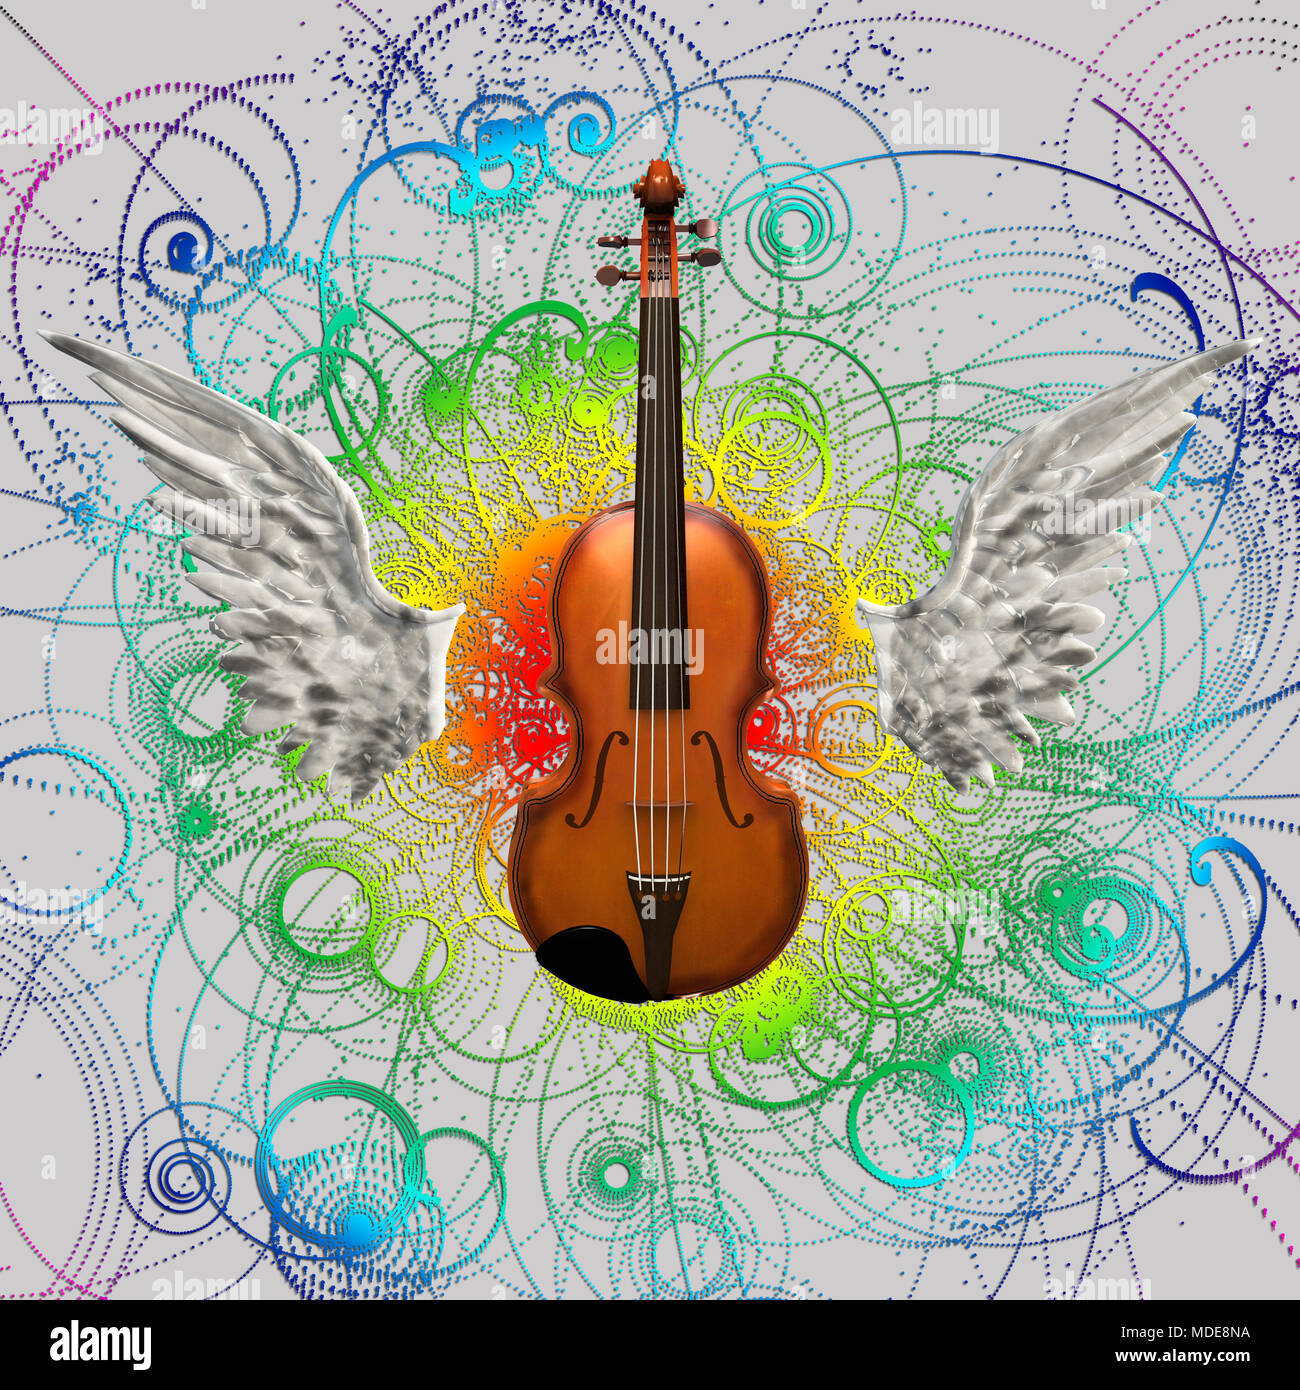 Violin Abstract Design Banque D'Images